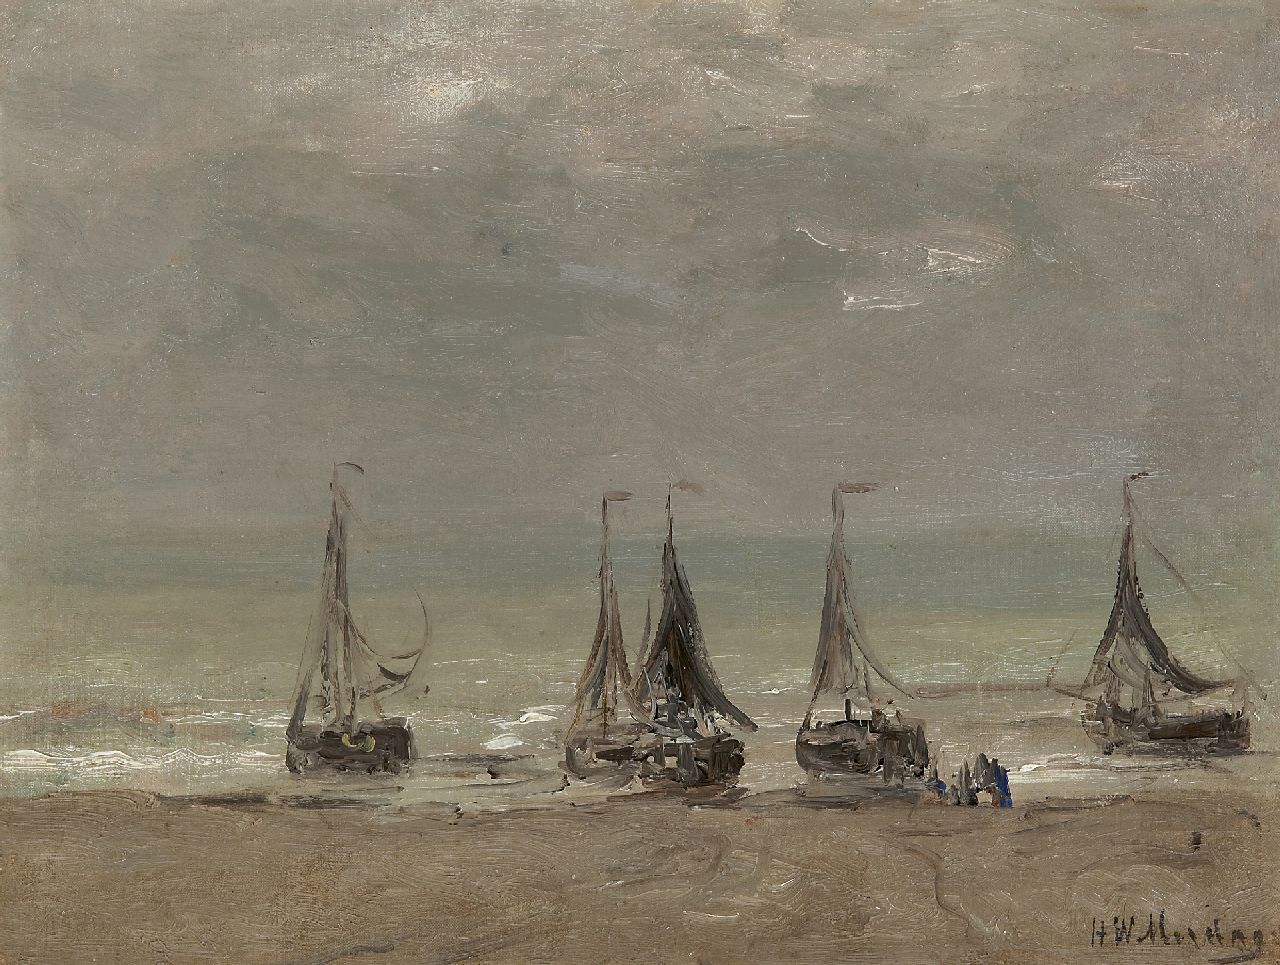 Mesdag H.W.  | Hendrik Willem Mesdag, Five fishing boats on the beach, oil on canvas laid down on panel 30.4 x 40.4 cm, signed l.r.